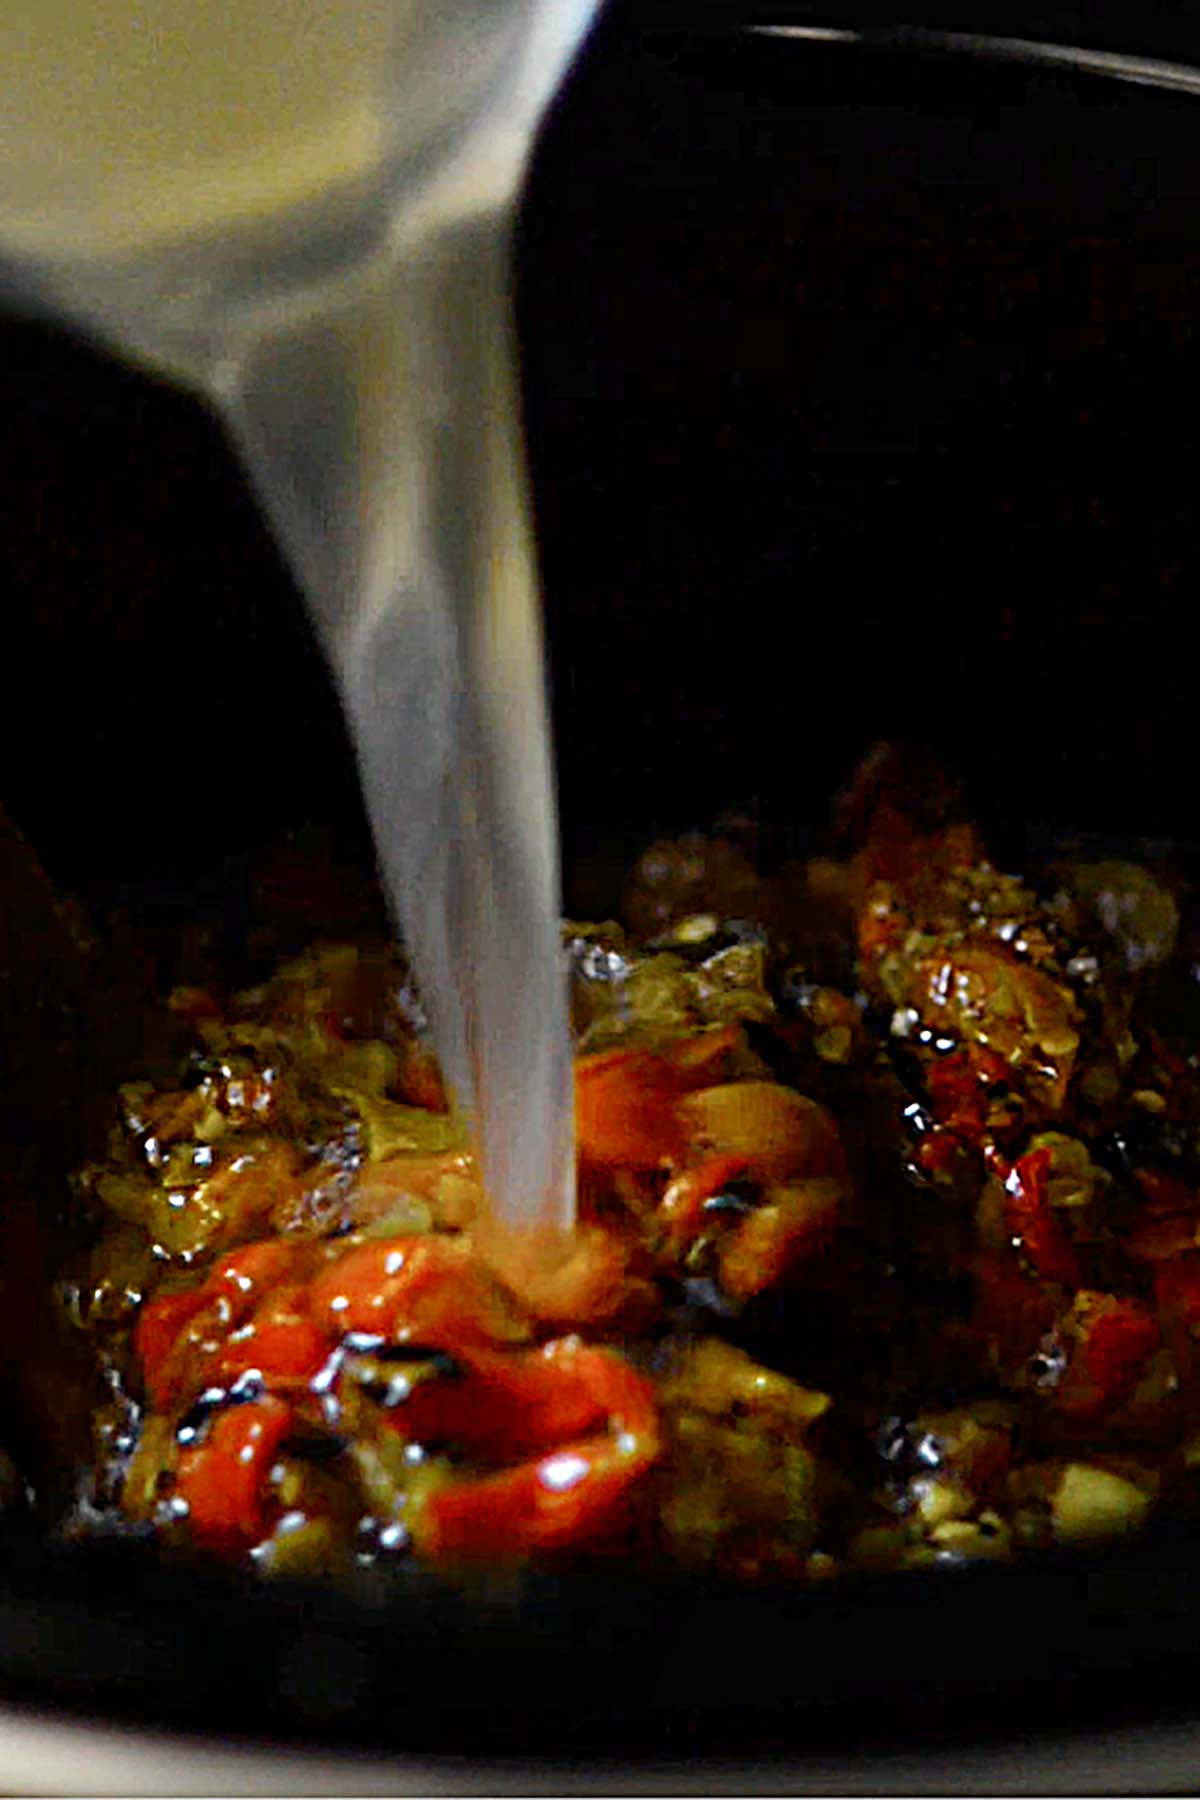 Chicken broth being poured into a slow cooker with diced roasted hatch chiles.